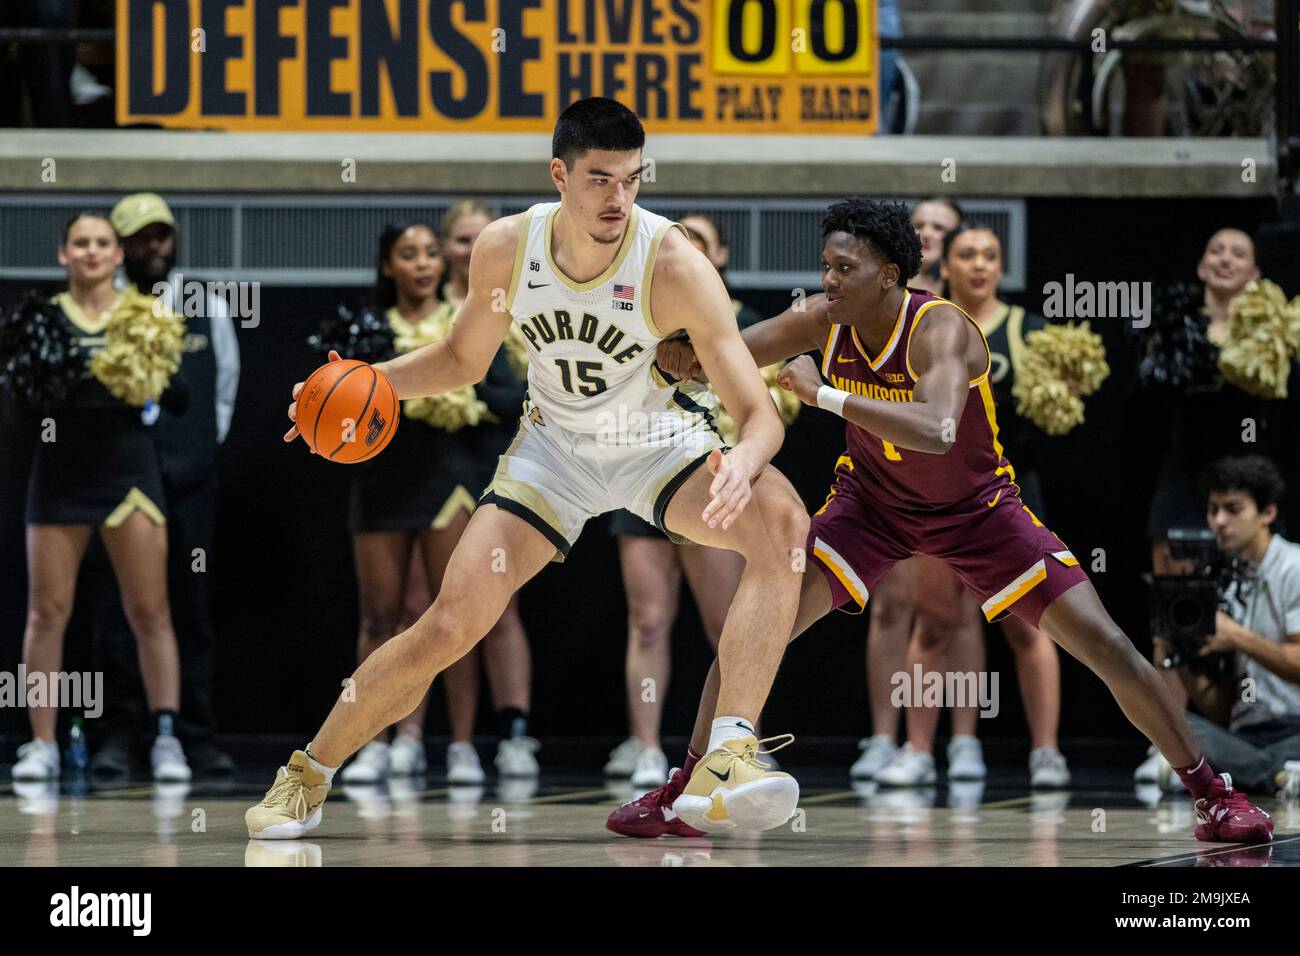 purdue-center-zach-edey-15-works-the-ball-against-the-defense-of-minnesota-forward-joshua-ola-joseph-1-during-the-first-half-of-an-ncaa-college-basketball-game-sunday-dec-4-2022-in-west-lafayette-ind-ap-photodoug-mcschooler-2M9JXEA.jpg